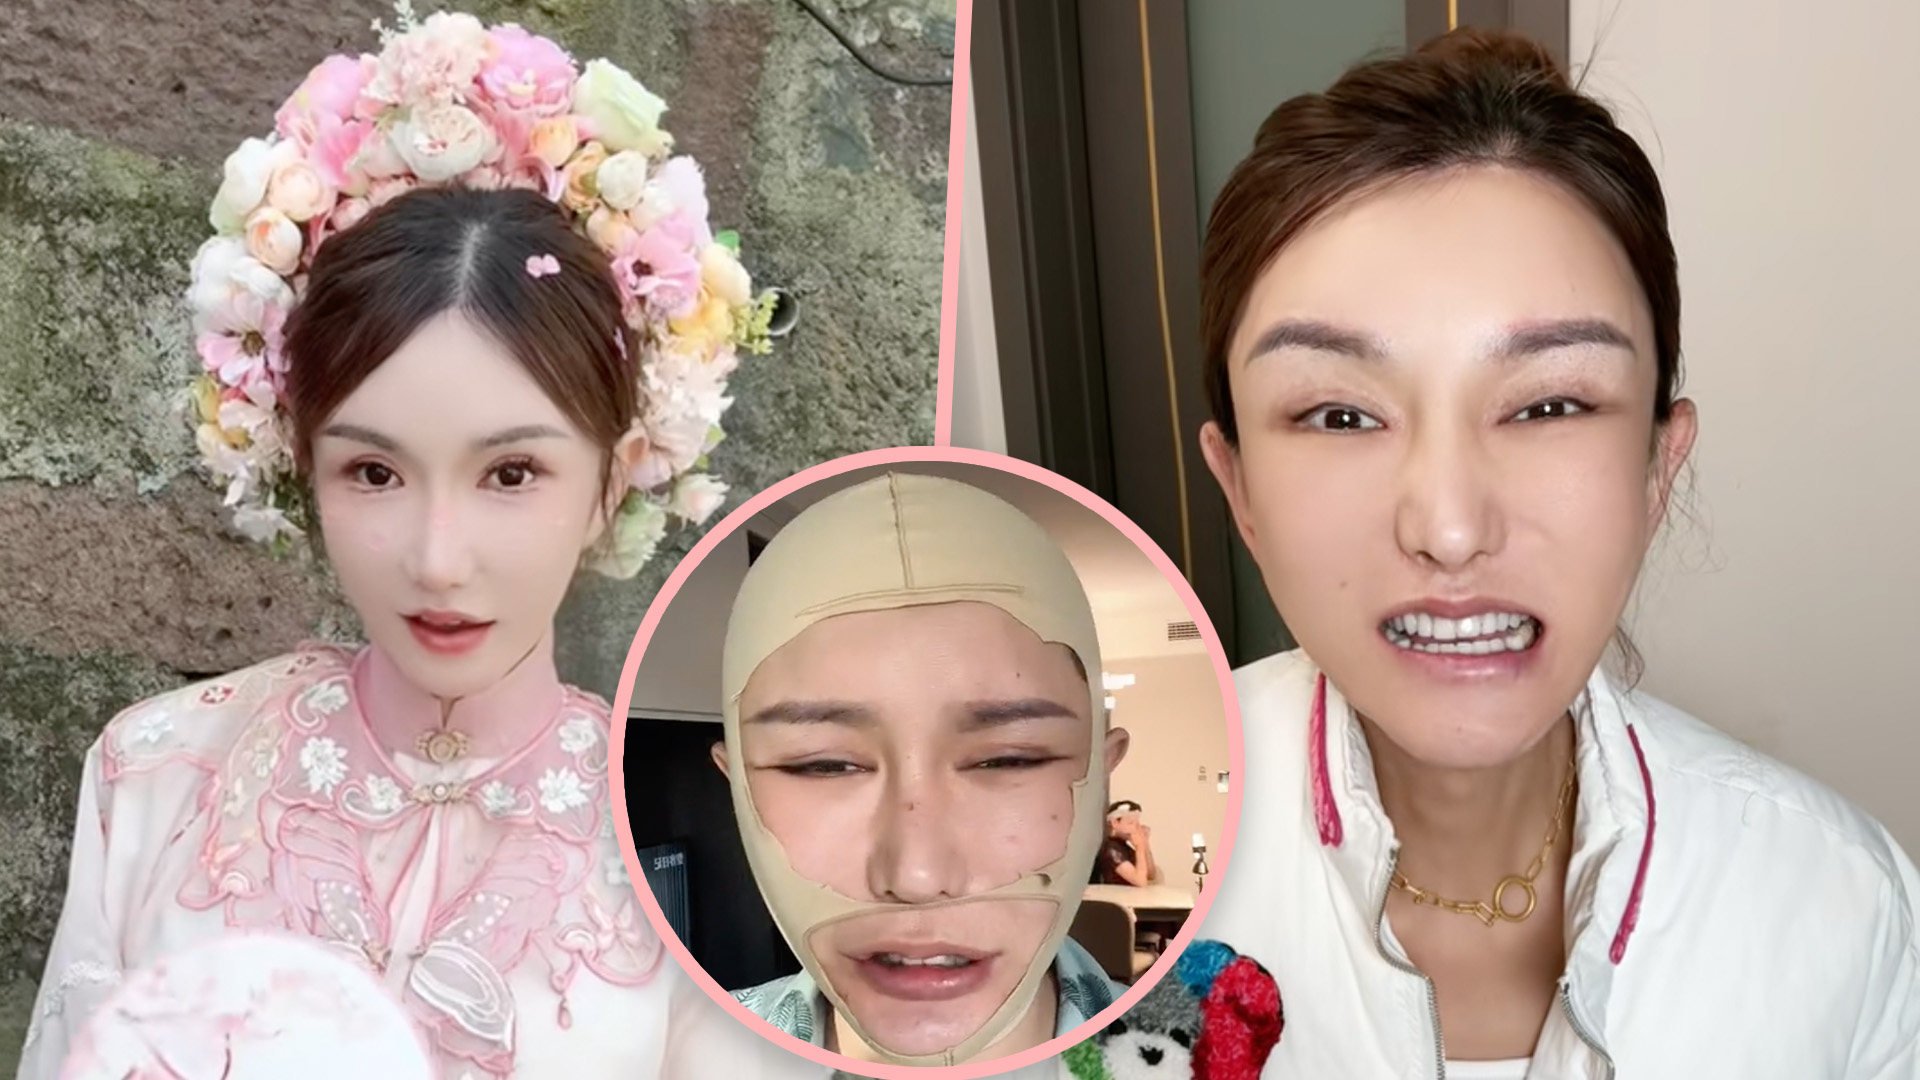 A transgender woman KOL in China has shocked her 2.2 million followers with deformities she suffered after botched plastic surgery which cost her US$183,000. Photo: SCMP composite/Douyin